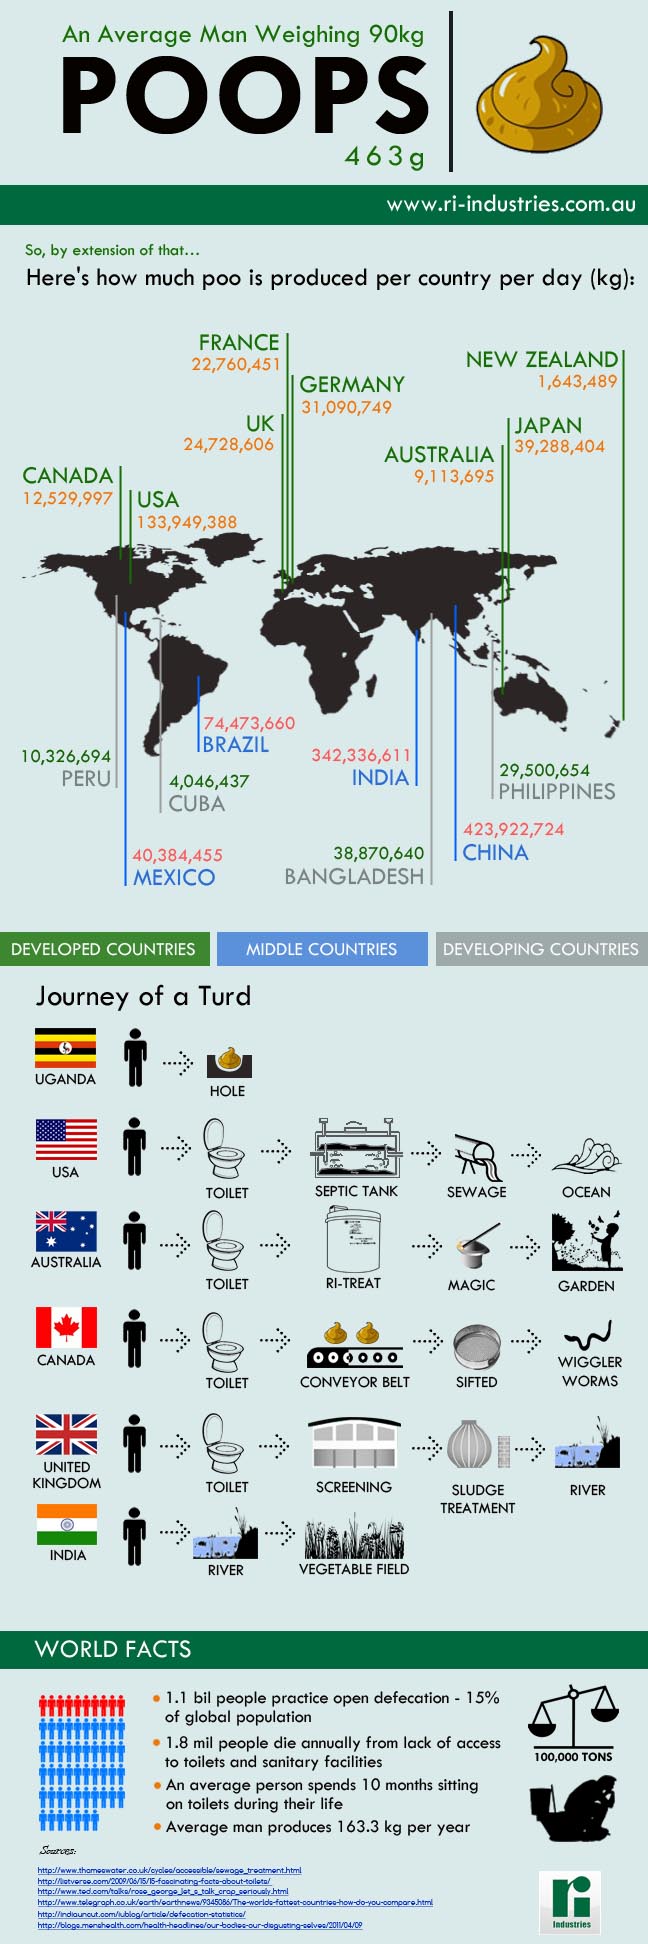 Journey of The Turd